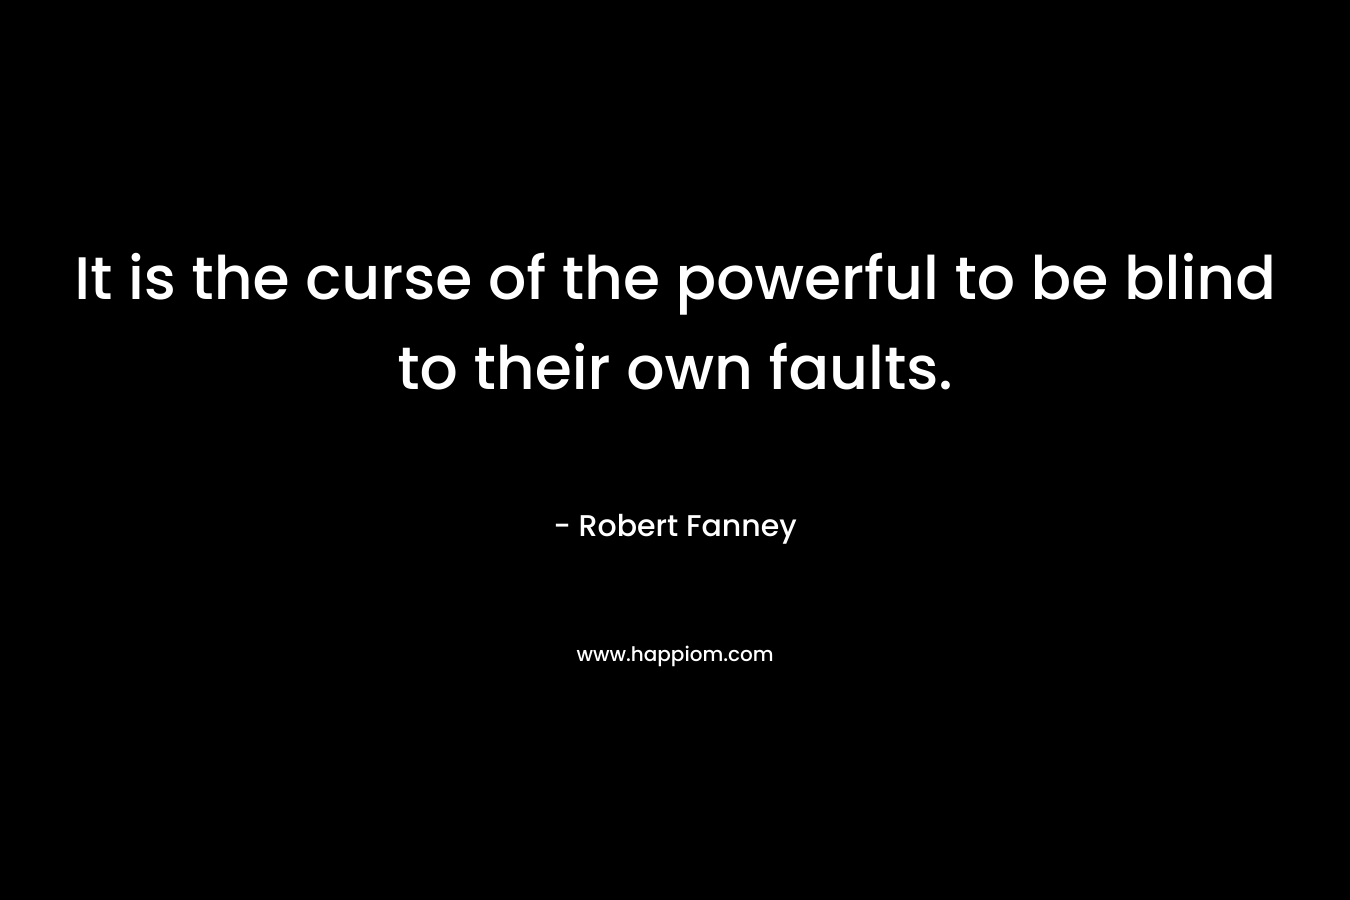 It is the curse of the powerful to be blind to their own faults. – Robert Fanney